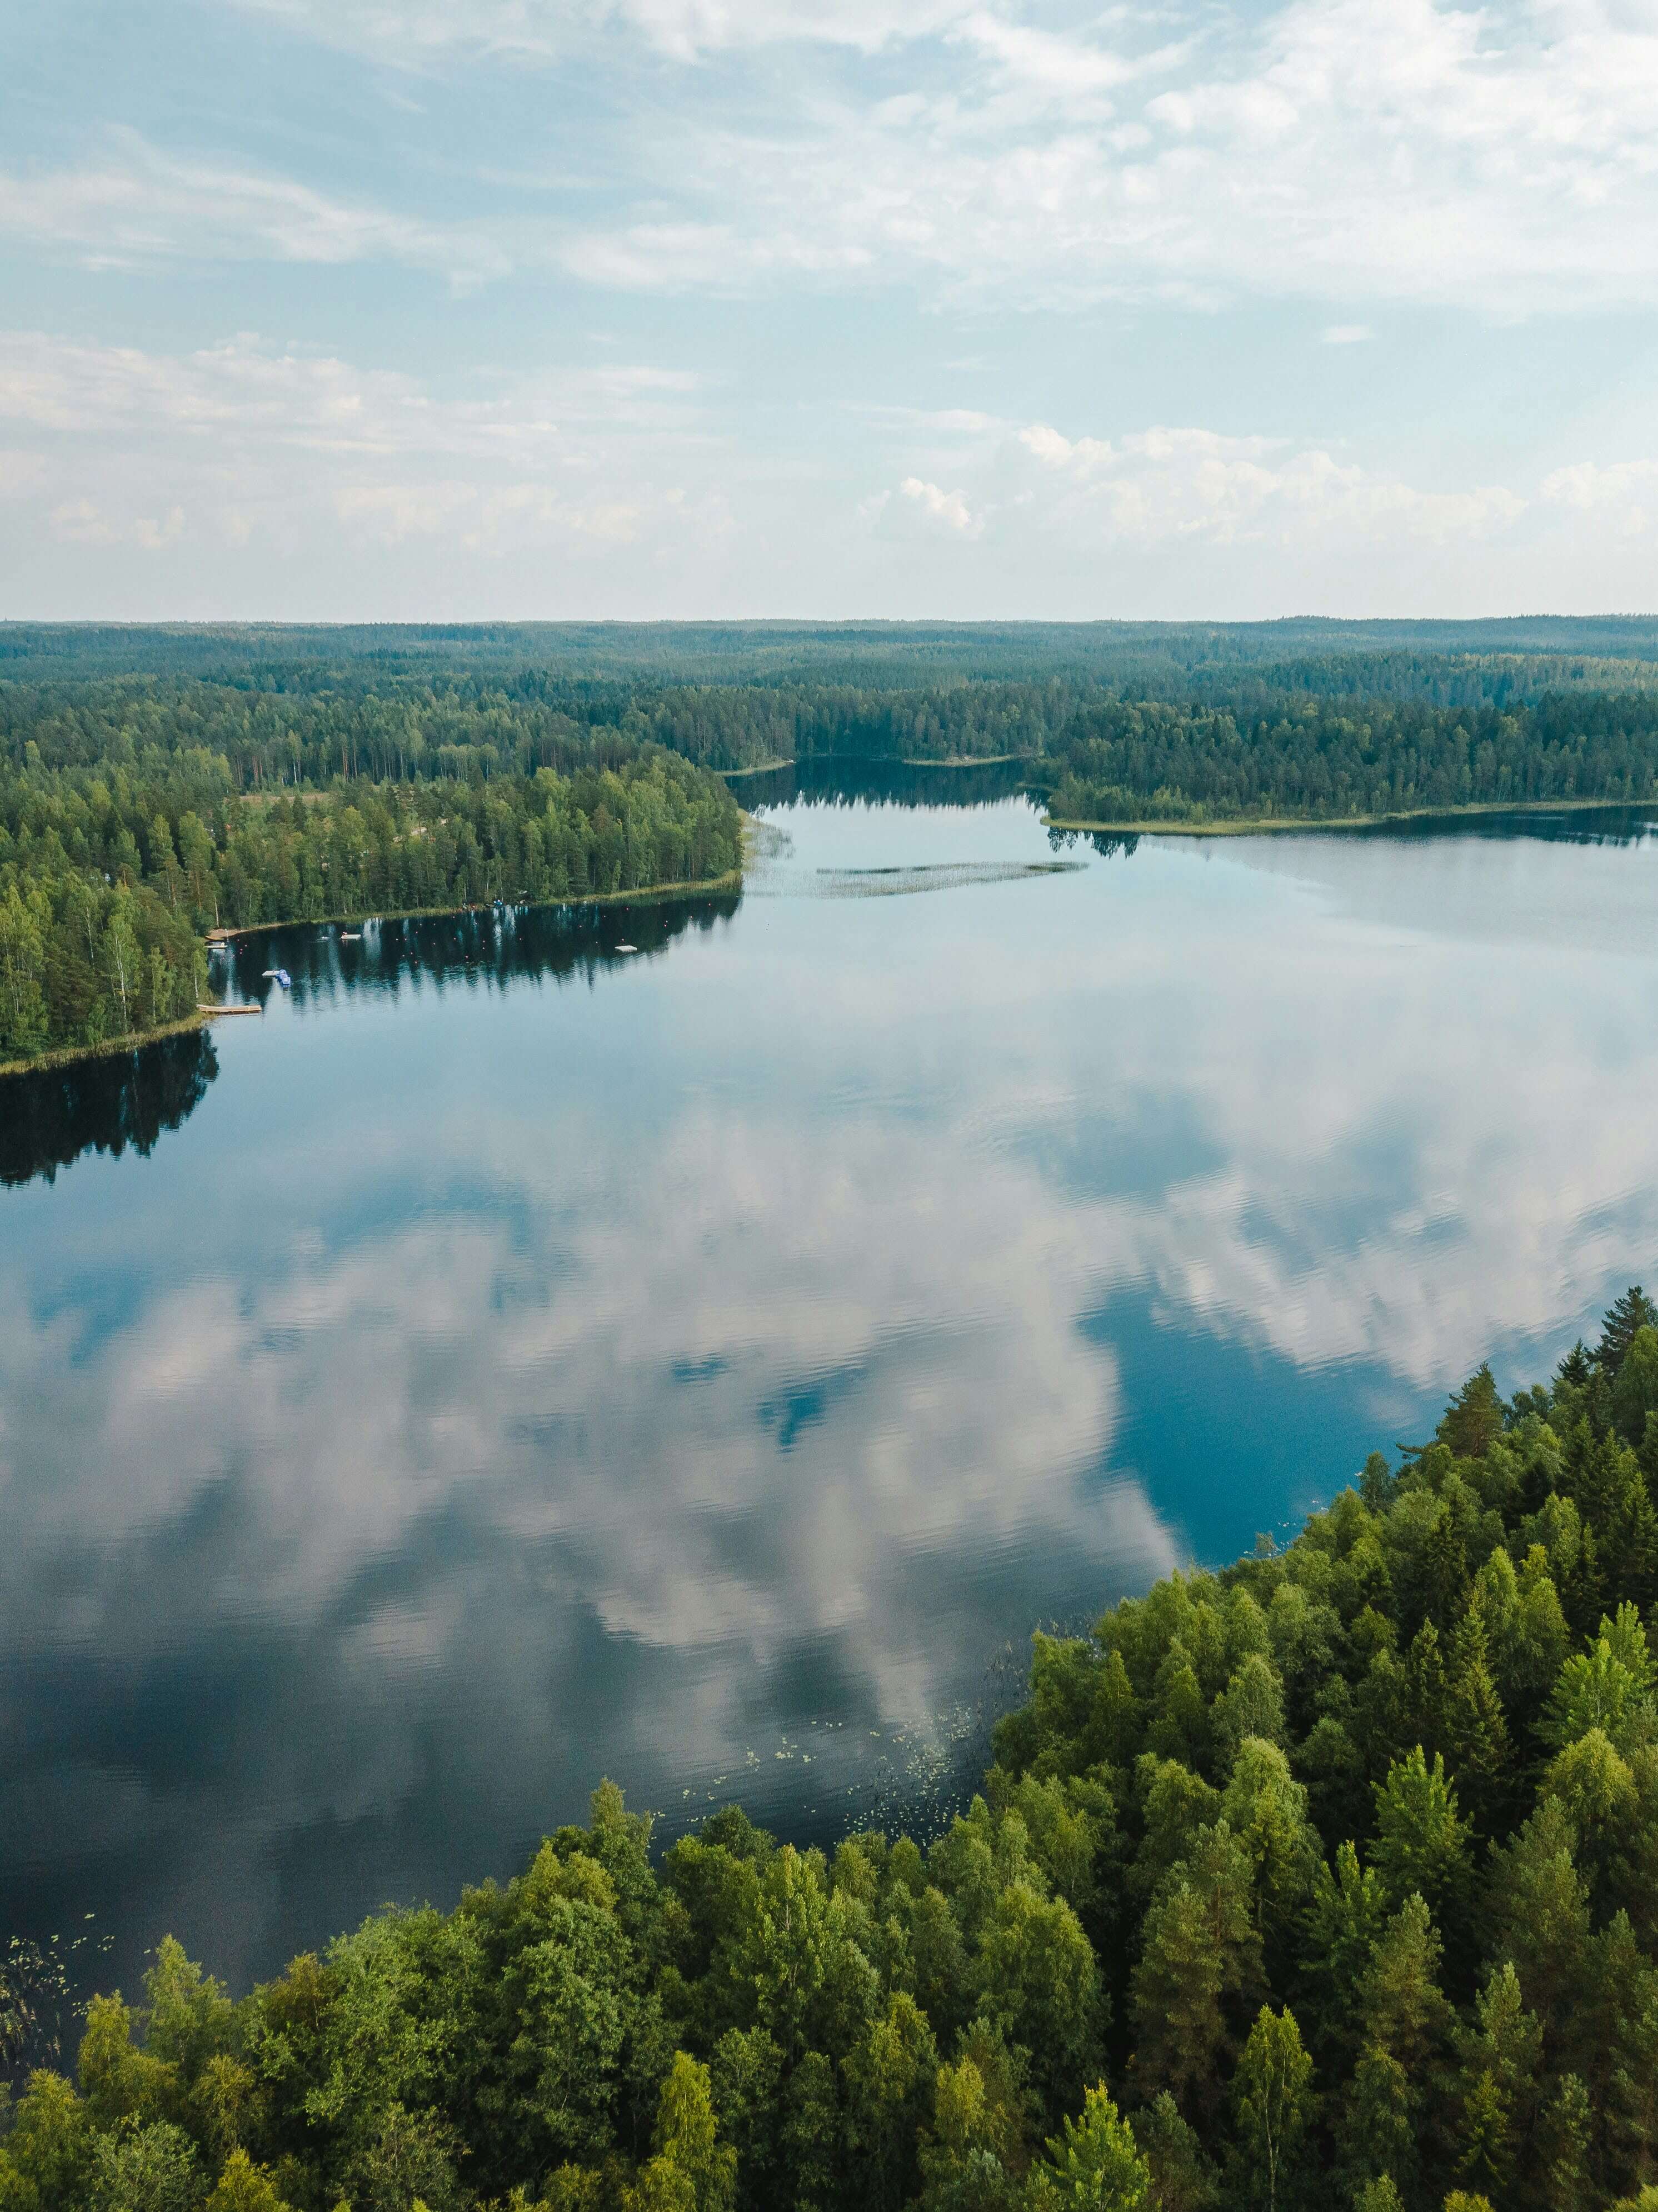 <p>Are you planning a trip to Finland?&nbsp;</p><p><strong>Means of travel</strong></p><p>You will most likely arrive to Helsinki Airport (Vantaa).&nbsp;</p><p>Then you can choose&nbsp;different means of transport for travelling across the country:&nbsp;</p><p>1. Renting a car. If you want to travel easily in Finland without any limits. You can discover different regions and places and start your trip in one place and then return back the car in other city (upon request). We recommend to contact in advance car renting company, plan the itinerary and discuss details with its support.&nbsp;</p><p>2. You can travel by train. Trains are going according to the schedule, quiet fast and there are a lot of stops in different cities and towns. Go to the official website of the Finnish railways and book your ticket online https://www.vr.fi/en The train doesn’t go directly to your accommodation but you can get off at the nearest station and then book a transfer or a taxi: Imatra for Saimaa Lakeside cottages and Kuopio or Siilinjärvi for Tahko Hills cottages. A few websites to book a taxi https://www.imatrantaksi.fi/ for Saimaa Lakeside cottage complex and https://taksi1.fi/ for Tahko Hills cottage complex.&nbsp;</p><p>If you live in Bergamo or close to this town, there are direct flights by Ryanair to Lappeenranta. Our cottages Saimaa Lakeside are located only from 60 km from Lappeenranta. And as you know Ryanair it’s a low cost company.&nbsp;</p><p>Travelling by car in Europe, probably you will take the way Estonia-Finland by ferry. Traffic and roads are very comfortable for driving in Finland. Please pay attention and obey the road rules, otherwise fines are extremely high in Finland. There are a lot of video and photo survey on roads. If you have an accident, call the police even though both parties came to a conclusion. It will help you to discuss the following details with the insurance. Call for free in an urgent case: 112 or 10022.&nbsp;</p><p>You can rent a car in any company but our guests recommended the service Discover Cars https://www.discovercars.com where you can choose any types of vehicle according to your requests: sedan, Crossover, 4x4, MPV etc.&nbsp;One important fact is that the support is a multilingual team and there is no hidden fees.&nbsp;</p><p><strong>Mobile communication</strong></p><p>The Finnish area code is +358. Tip: you can make calls free of charge via Skype, WhatsApp, Viber and other internet applications, especially as all our cottages have free wi-fi. If you need to make a lot of calls and have mobile internet on your phone, it is recommended to buy a Finnish SIM card (sold without documents in R-kioski).</p><p><strong>Shopping in Finland&nbsp;</strong></p><p>Large shopping centers are open from 9 a.m. to 9 p.m. on weekdays and until 6 p.m. on weekends. Small shops and private shops operate on their own schedule, usually from 9 to 18 on weekdays, until 16 on Saturday, with Sunday off. We recommend that you check the opening hours of the shops you need in advance on the map of the region. Most shops are closed on holidays.&nbsp;Especially attractive prices during the sale seasons, which start on a clear schedule. Winter (Christmas) sale starts on 27 December and lasts for 1 month, summer sale is held after national holiday Juhannus (floating date at the end of June). Shops can organize a local sale, in which case the sign "ALE" or the familiar "SALE" appears in the windows. Here you can bargain with the seller. Second-hand shops in Finland are labelled "UFF". Don't forget about the tax free system!</p><p><strong>Emergency telephone numbers</strong> (call for free):</p><p>Police, including traffic police: 112</p><p>10022 Fire Service</p><p>112 Ambulance</p><p><strong>Alcohol</strong></p><p>The government has a monopoly on alcohol production thus alcohol is sold in excellent quality but at high prices. Alcohol markets “ALKO" are most often located in the central districts of the city. The standard working hours are: Mon-Fri 9:00-18:00, Fri 9:00-20:00, Sat 9:00-16:00, but they can vary. Please note that ALKO shops are closed on Sundays and public holidays. Beer and cider can be purchased in supermarkets. In restaurants you cannot consume alcohol that you have brought with you. In Duty Free shops you can buy alcohol at lower prices. Don't forget about customs regulations.</p><p><strong>Smoking</strong>&nbsp;</p><p>Smoking is prohibited in public places, including transport; customer service areas; educational establishments; offices and other workplaces; on school grounds; and at public events. Tobacco products may not be sold to anyone under 18 years of age.</p><p>Tax free: when you buy goods (except books and tobacco products) in Finland, you can get a partial refund - tax free. Depending on the type of product, it ranges from 8 to 17 per cent, with an average of 10 per cent. When leaving the country, you must present the receipt filled in by the shop assistant. People who have a work permit in any EEC country cannot get tax free.</p><p><strong>Time zone</strong></p><p>Standard time zone: UTC / GMT +2 hours in winter time and +3 hours in summer time. </p><p><strong>Climate</strong></p><p>Finland is characterised by a temperate climate, and depending on the direction of air currents, the climate can change from maritime to continental. 25% of Finland's territory lies above the Arctic Circle. Each season is distinct in its manifestation of climatic features: winters are moderately cold, with precipitation in the form of rain and snow in spring and autumn, while summers are relatively warm and the weather with rare rains and morning fogs. The coldest day was recorded on 28 January 1999 in Kittilä municipality (Lappi), where the air temperature was -51.5 ⁰C. In summer, the air periodically warms up to +30 ⁰C. The maximum temperature record was recorded on 29 July 2010 in the community of Liperi (North Karelia): +37.2 ⁰C.</p><p>Due to the fact that most of Finland is covered by forests and lakes, the temperature in holiday areas is perceived as comfortable.</p><p>Most of Finland is in the lowlands, but in the north-east some mountains reach more than 1000 metres. For lovers of active holidays, skiing, snowboarding, snowmobiling in winter, which traditionally starts from the beginning of December and ends at the end of April, is suitable.</p><p>Summer holidays will appeal to those who appreciate water scenery among forests in the region of South Karelia on Lake Saimaa. In July, the average air temperature is 21 ⁰C.</p><p>If you dream of seeing a polar day, you can do it in Finland from the beginning of June to the beginning of July. The peak is from 22 to 23 June. The sun does not set at all at this time, and on the Sunday closest to these dates Finns celebrate their traditional holiday Juhannnus. </p><p><br></p><p><br></p><p><br></p>